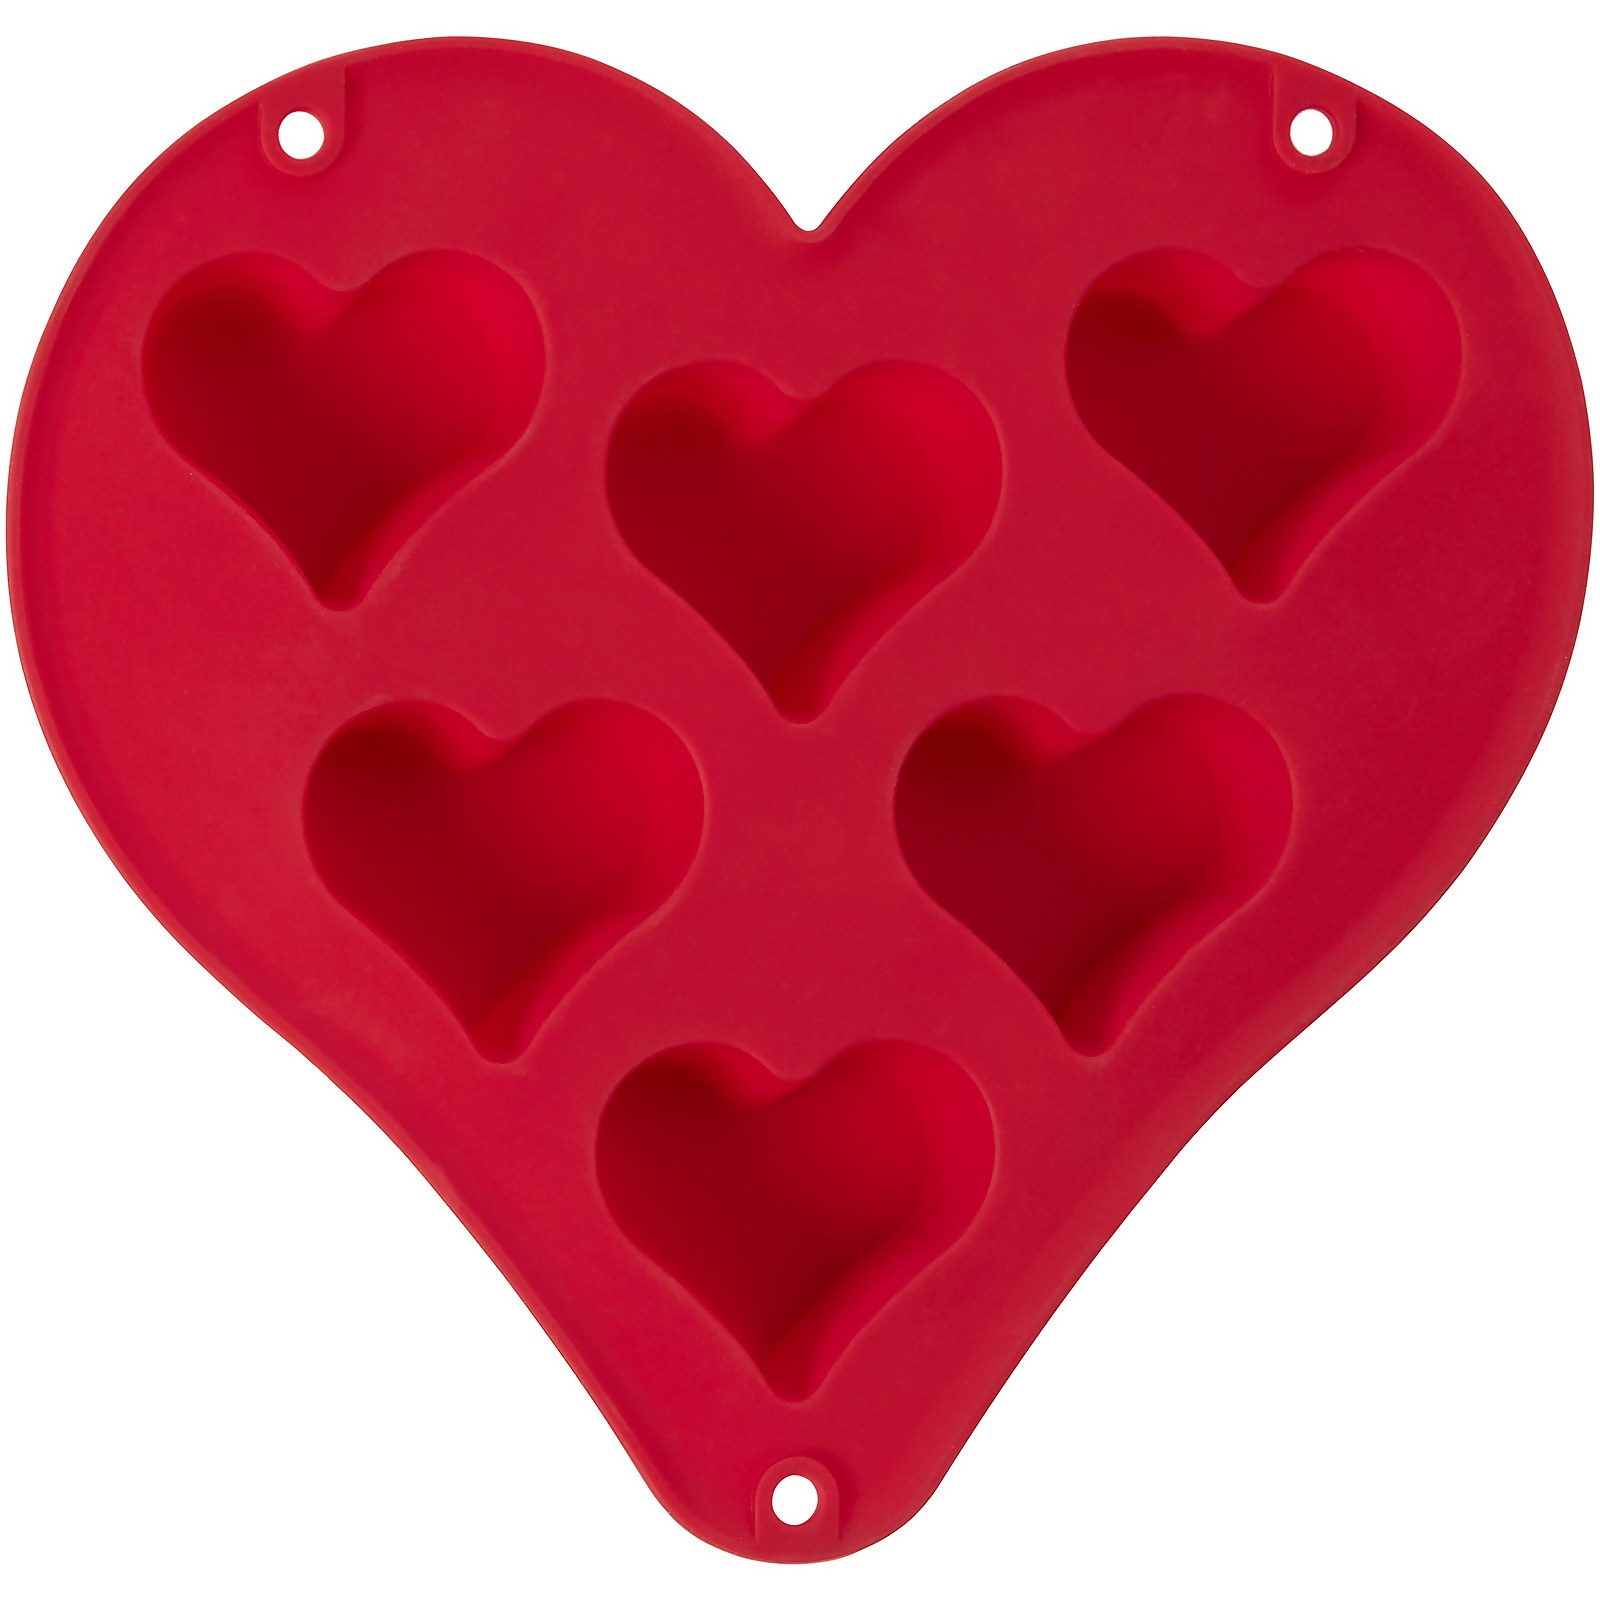 Image of Mimo Heart Shaped 6 Baking Mould - Red Silicone